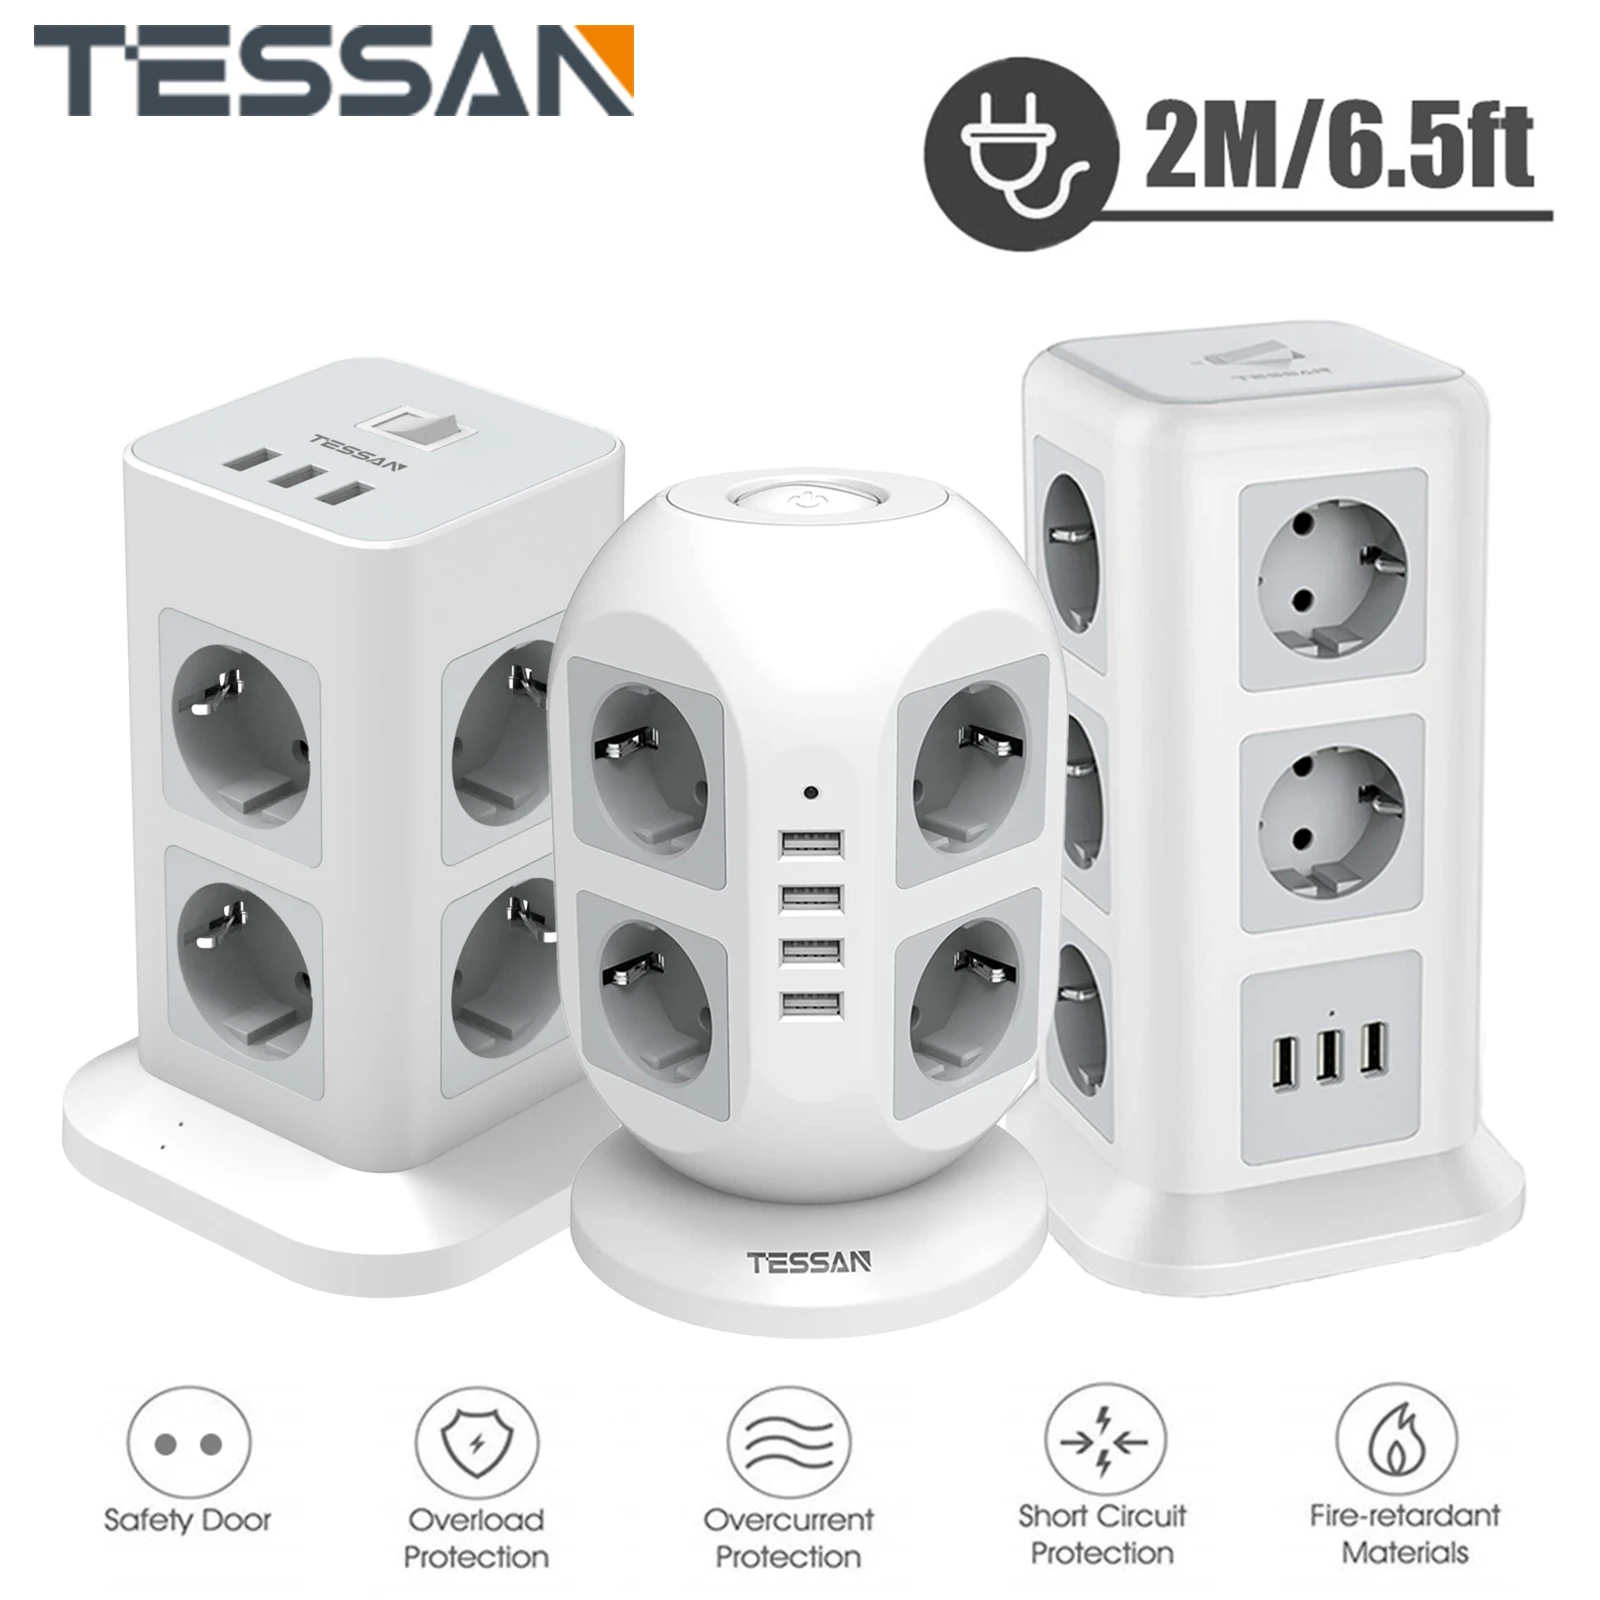 

TESSAN Vertical Power Strip Multiple Socket Tower Surge Protector EU Plug Outlets with USB Switch 2m Extension Cable Home Office